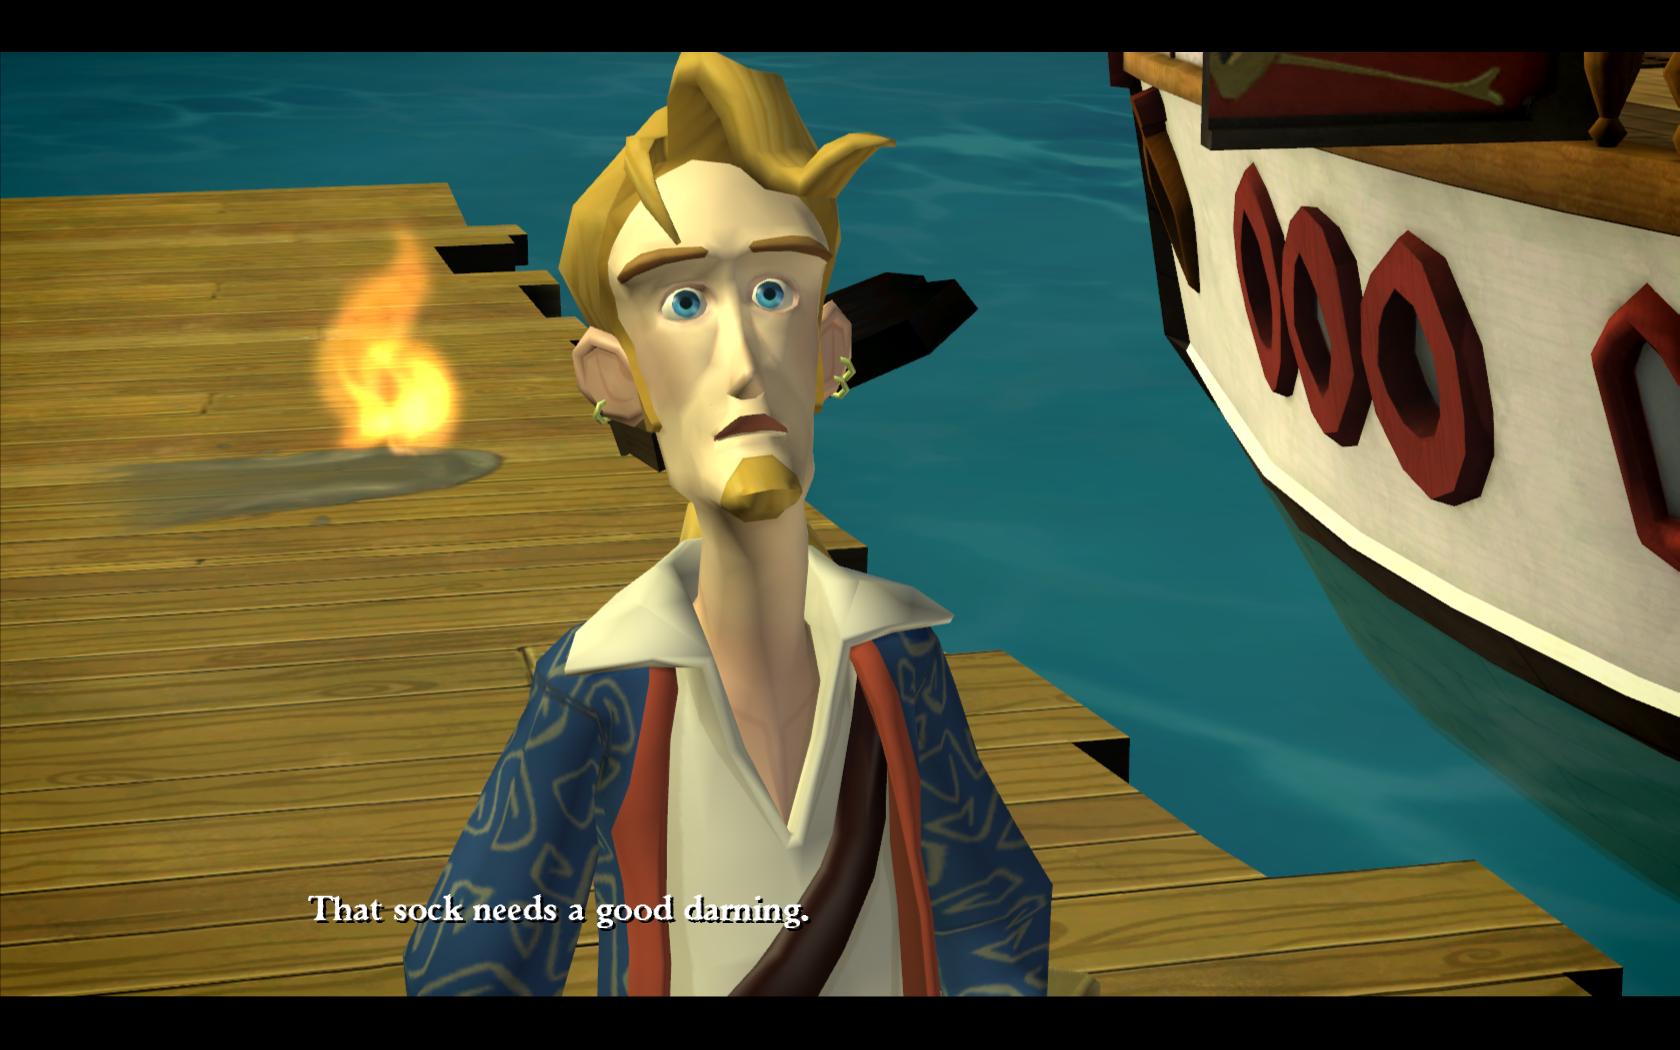 Tales Of Monkey Island Backgrounds, Compatible - PC, Mobile, Gadgets| 1680x1050 px